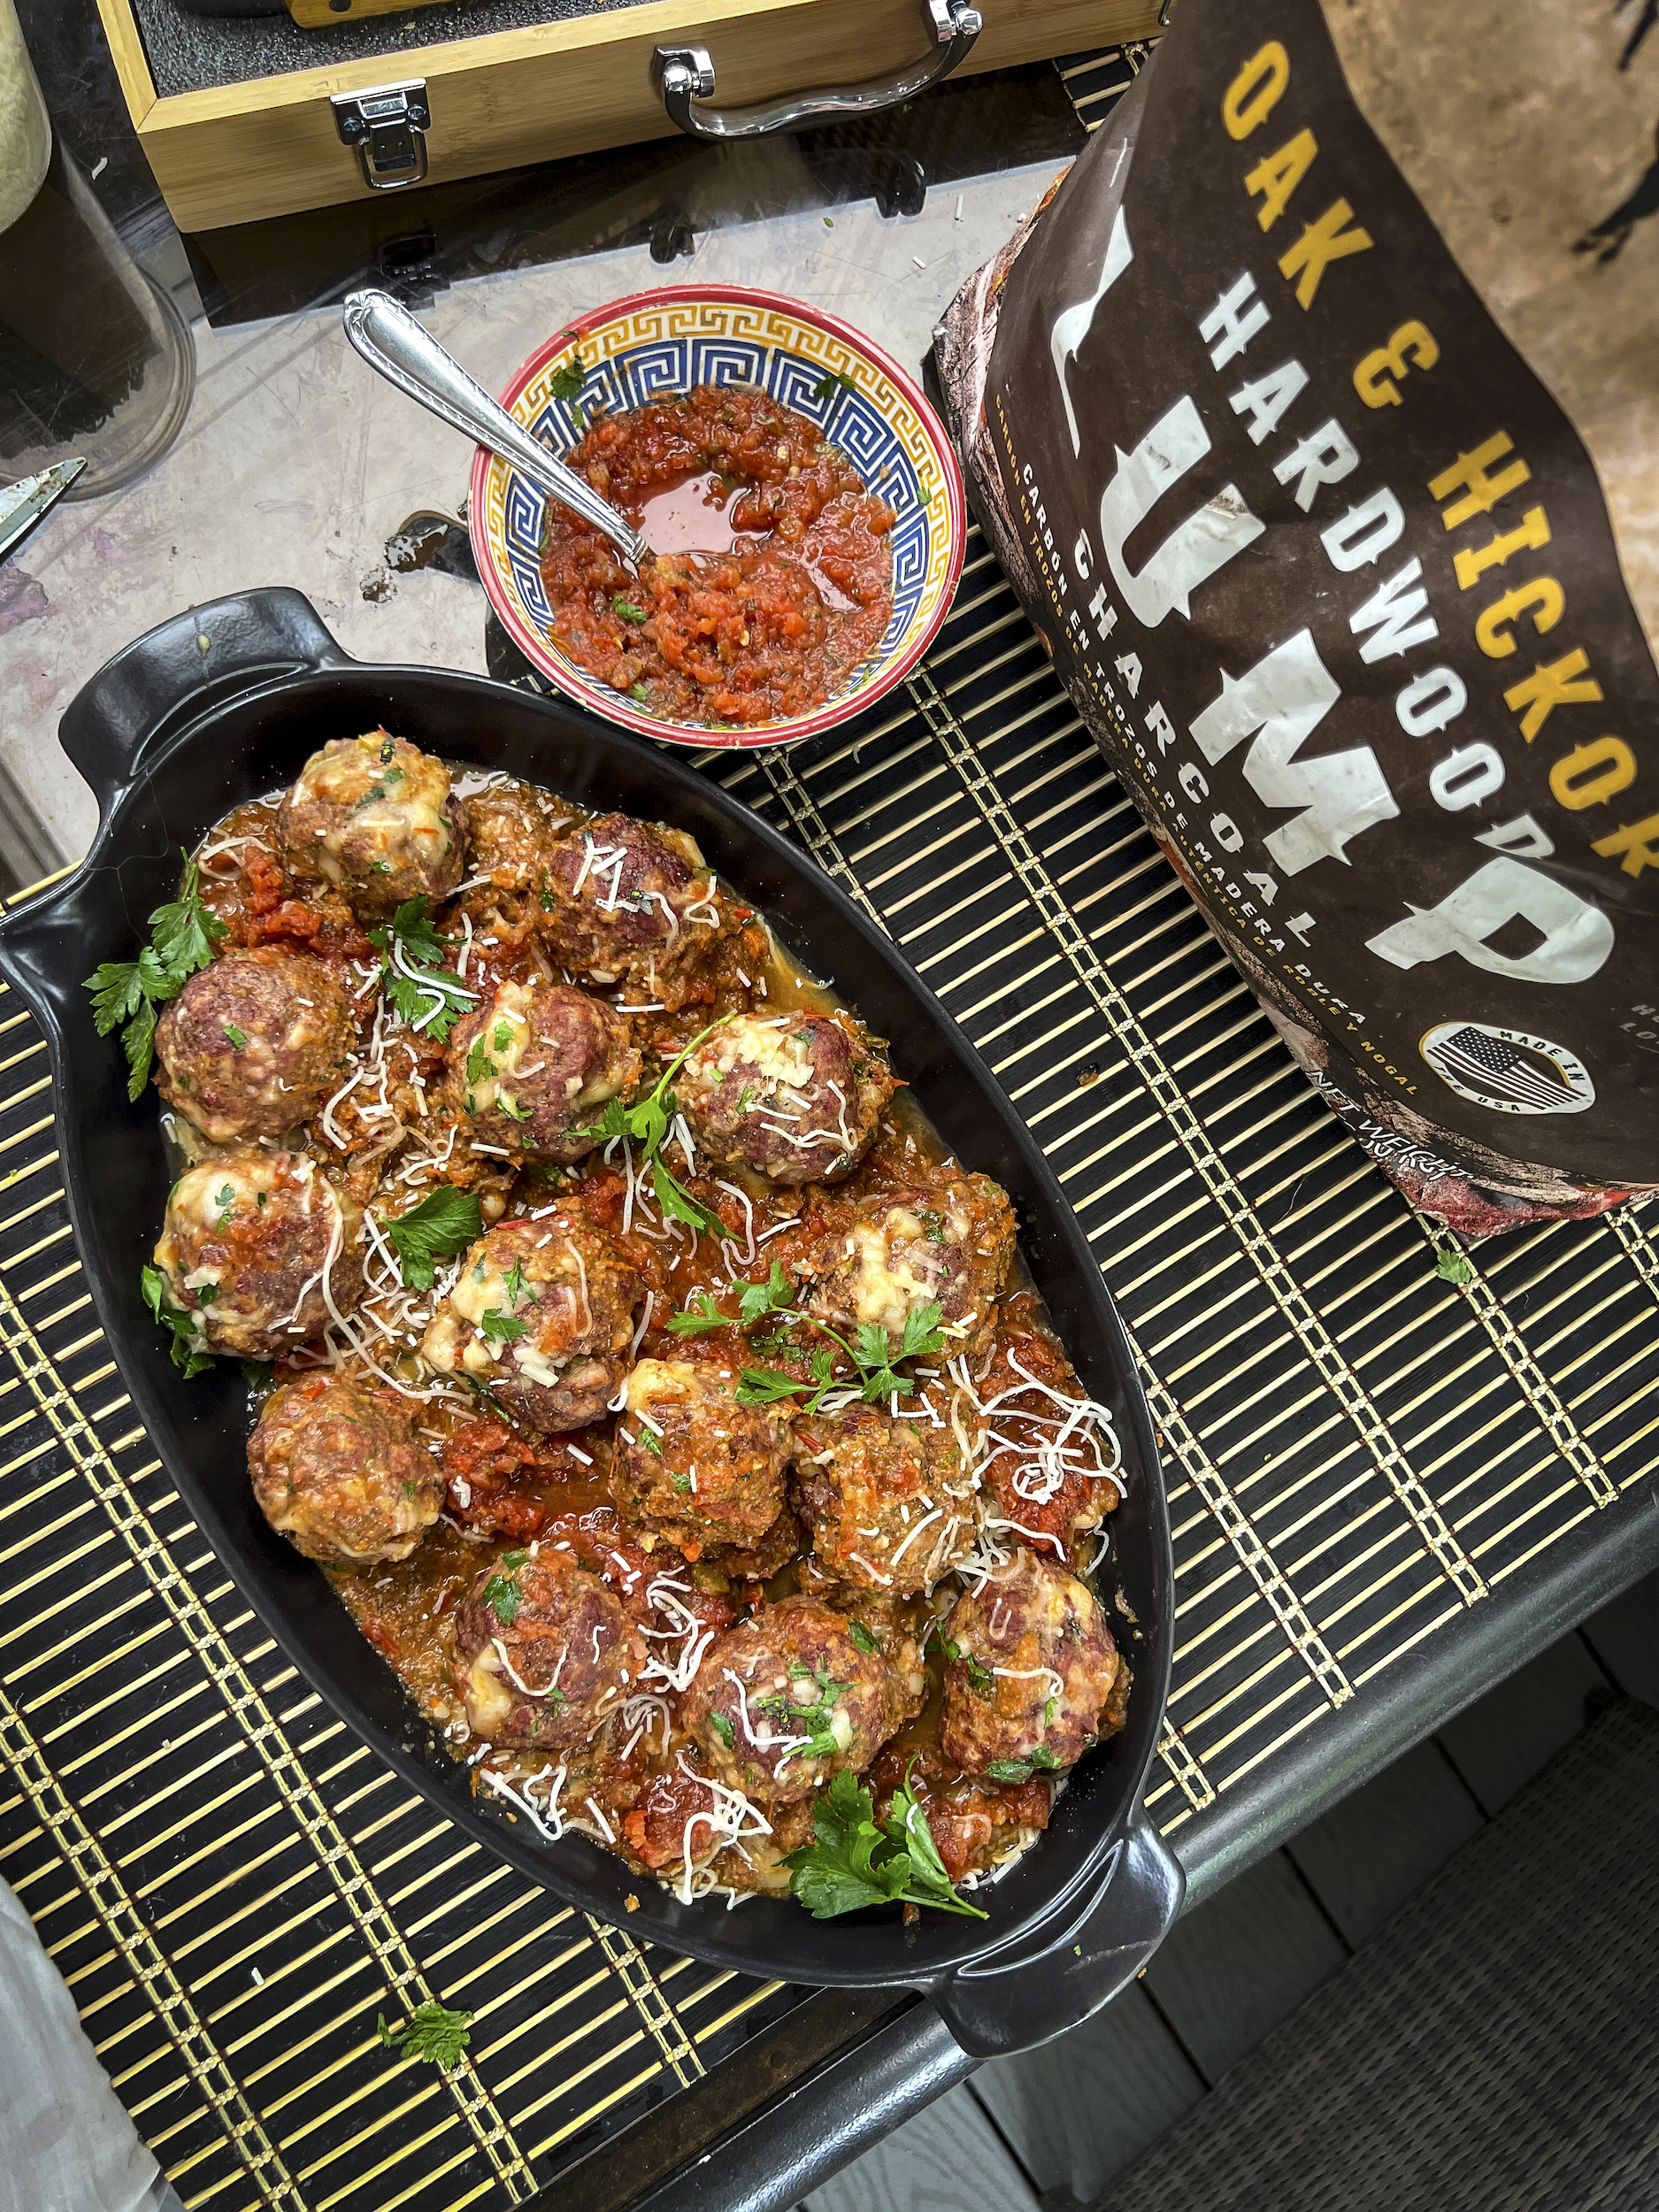 Smoked Meatballs are in a black serving dish. There is a partial bag of Lump Charcoal and a bowl of pasta sauce.